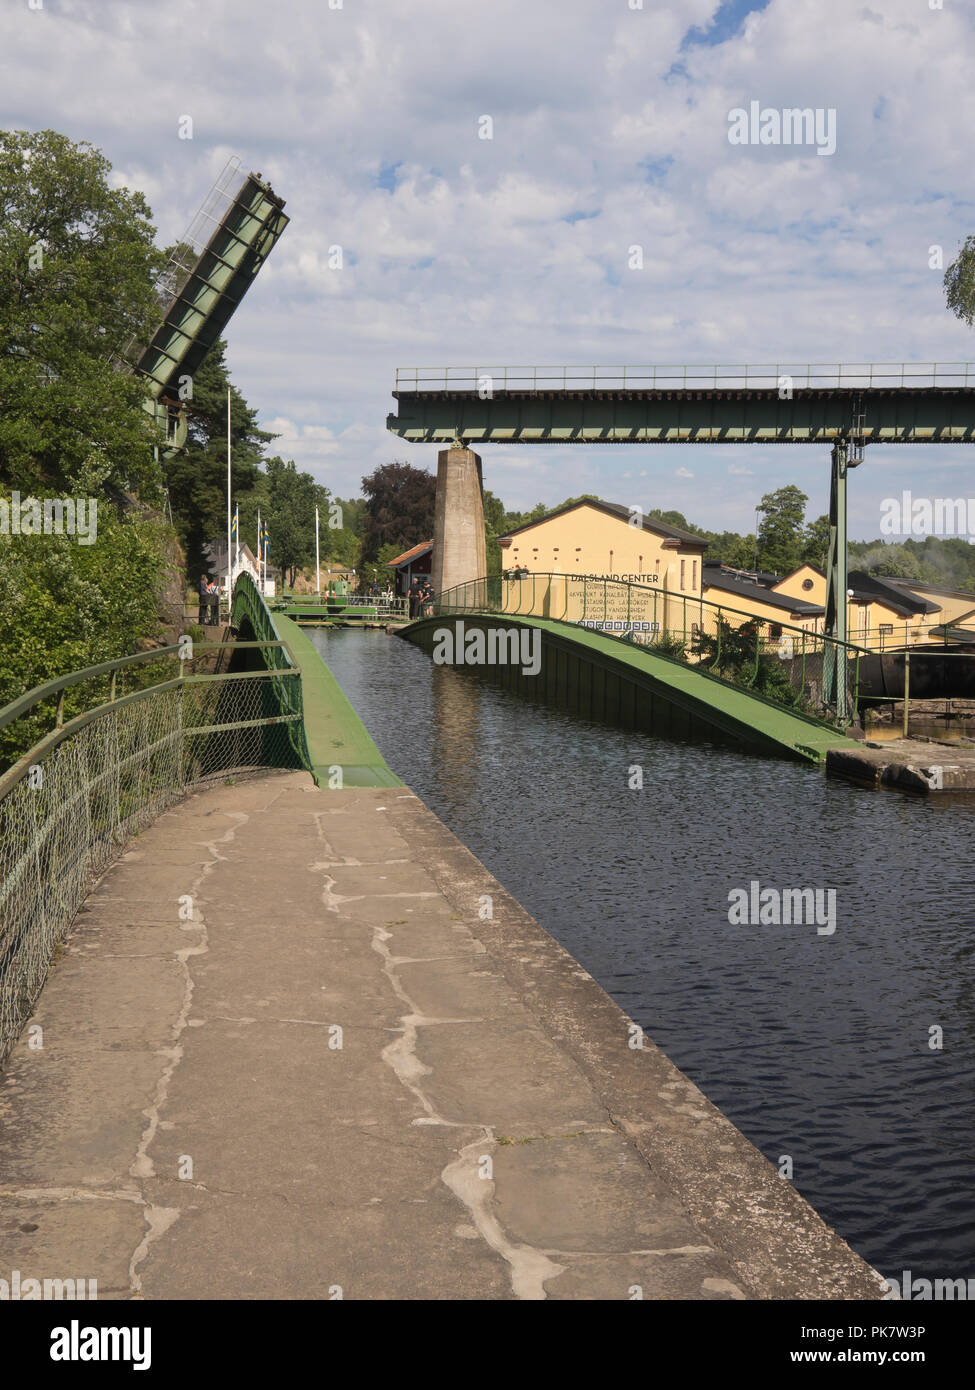 Håverud in Dalsland province Sweden,where the tourist attraction Dalslands canal passes over a bridge, railway aqueduct bridge opens above Stock Photo